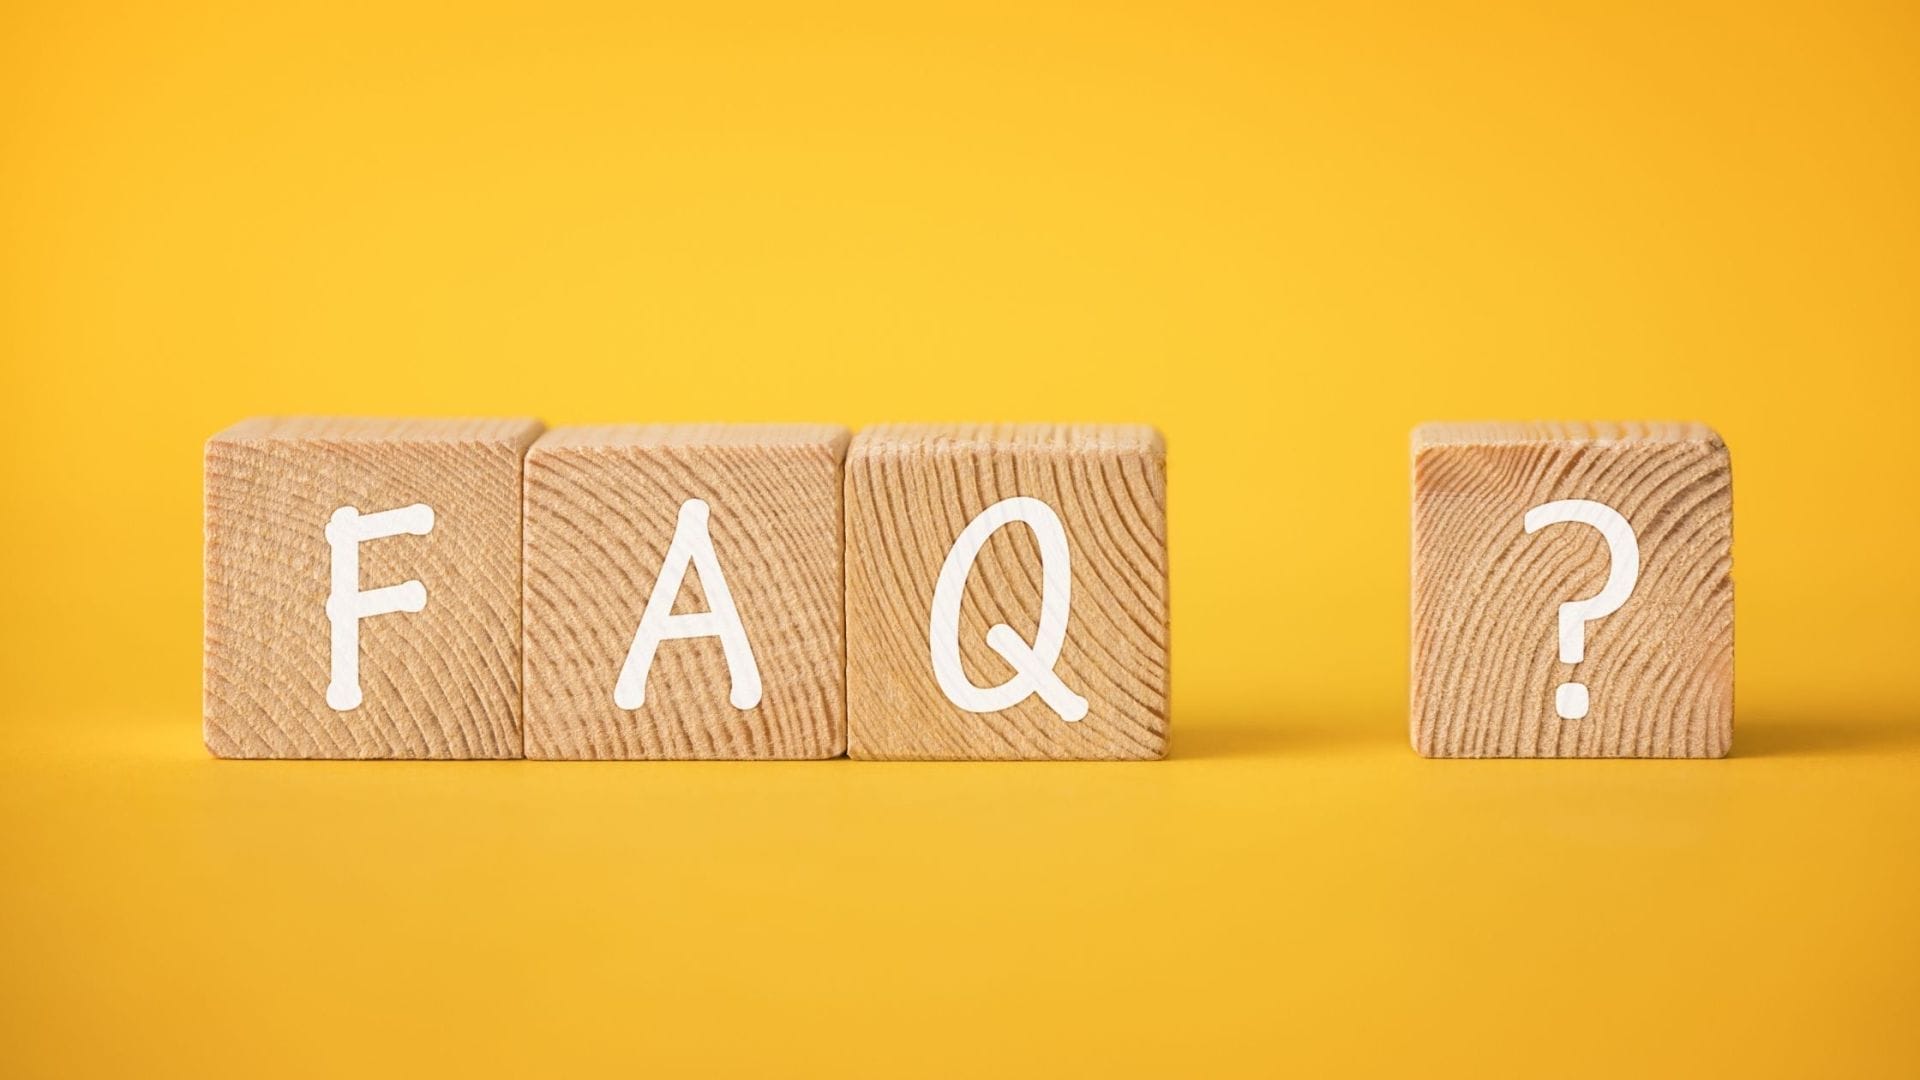 Three wooden blocks against a yellow background spell out 'FAQ' with the last block featuring a question mark, symbolizing frequently asked questions about stomach cancer therapy financing. This image could lead to a section that provides answers to common inquiries regarding the expenses involved in treating stomach cancer.